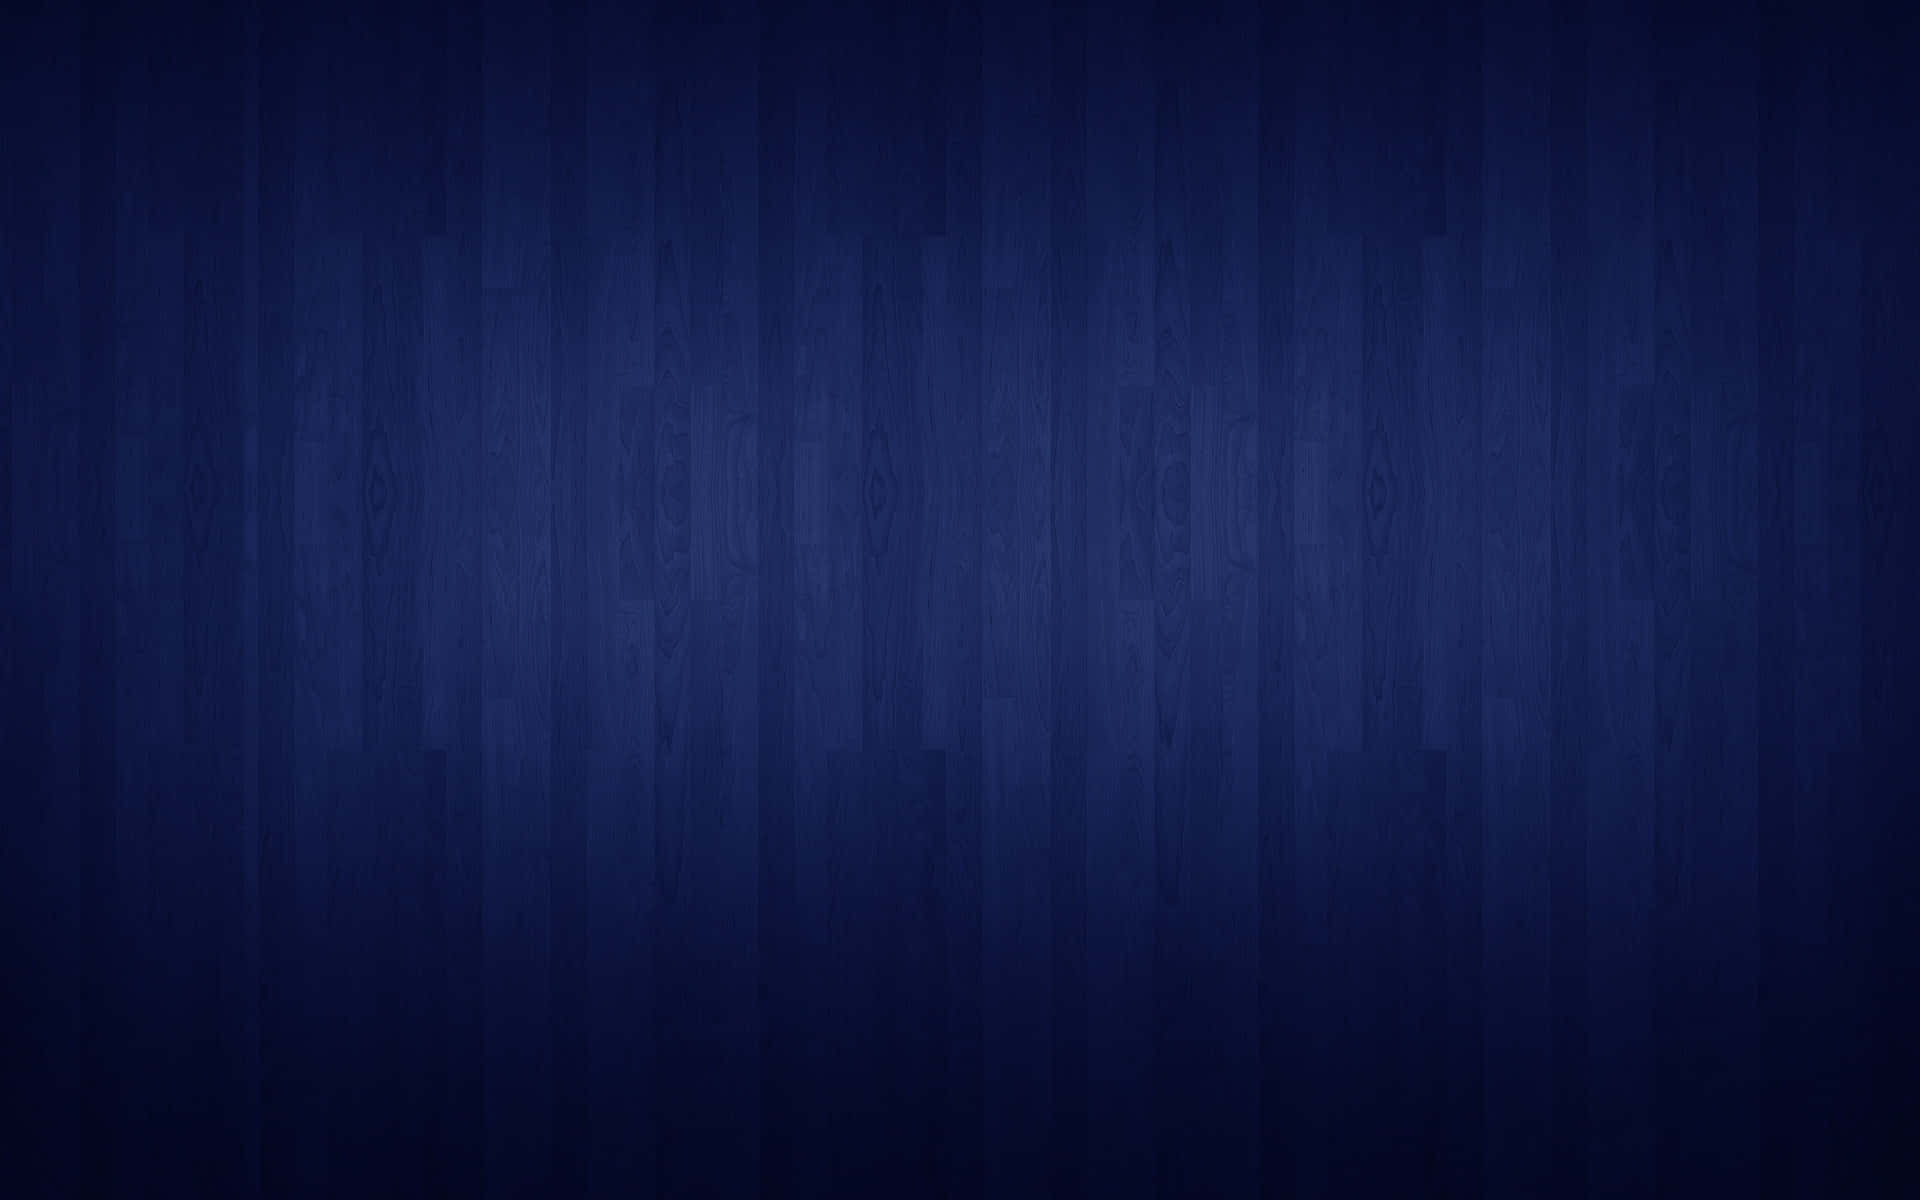 A tranquil blue abstract background